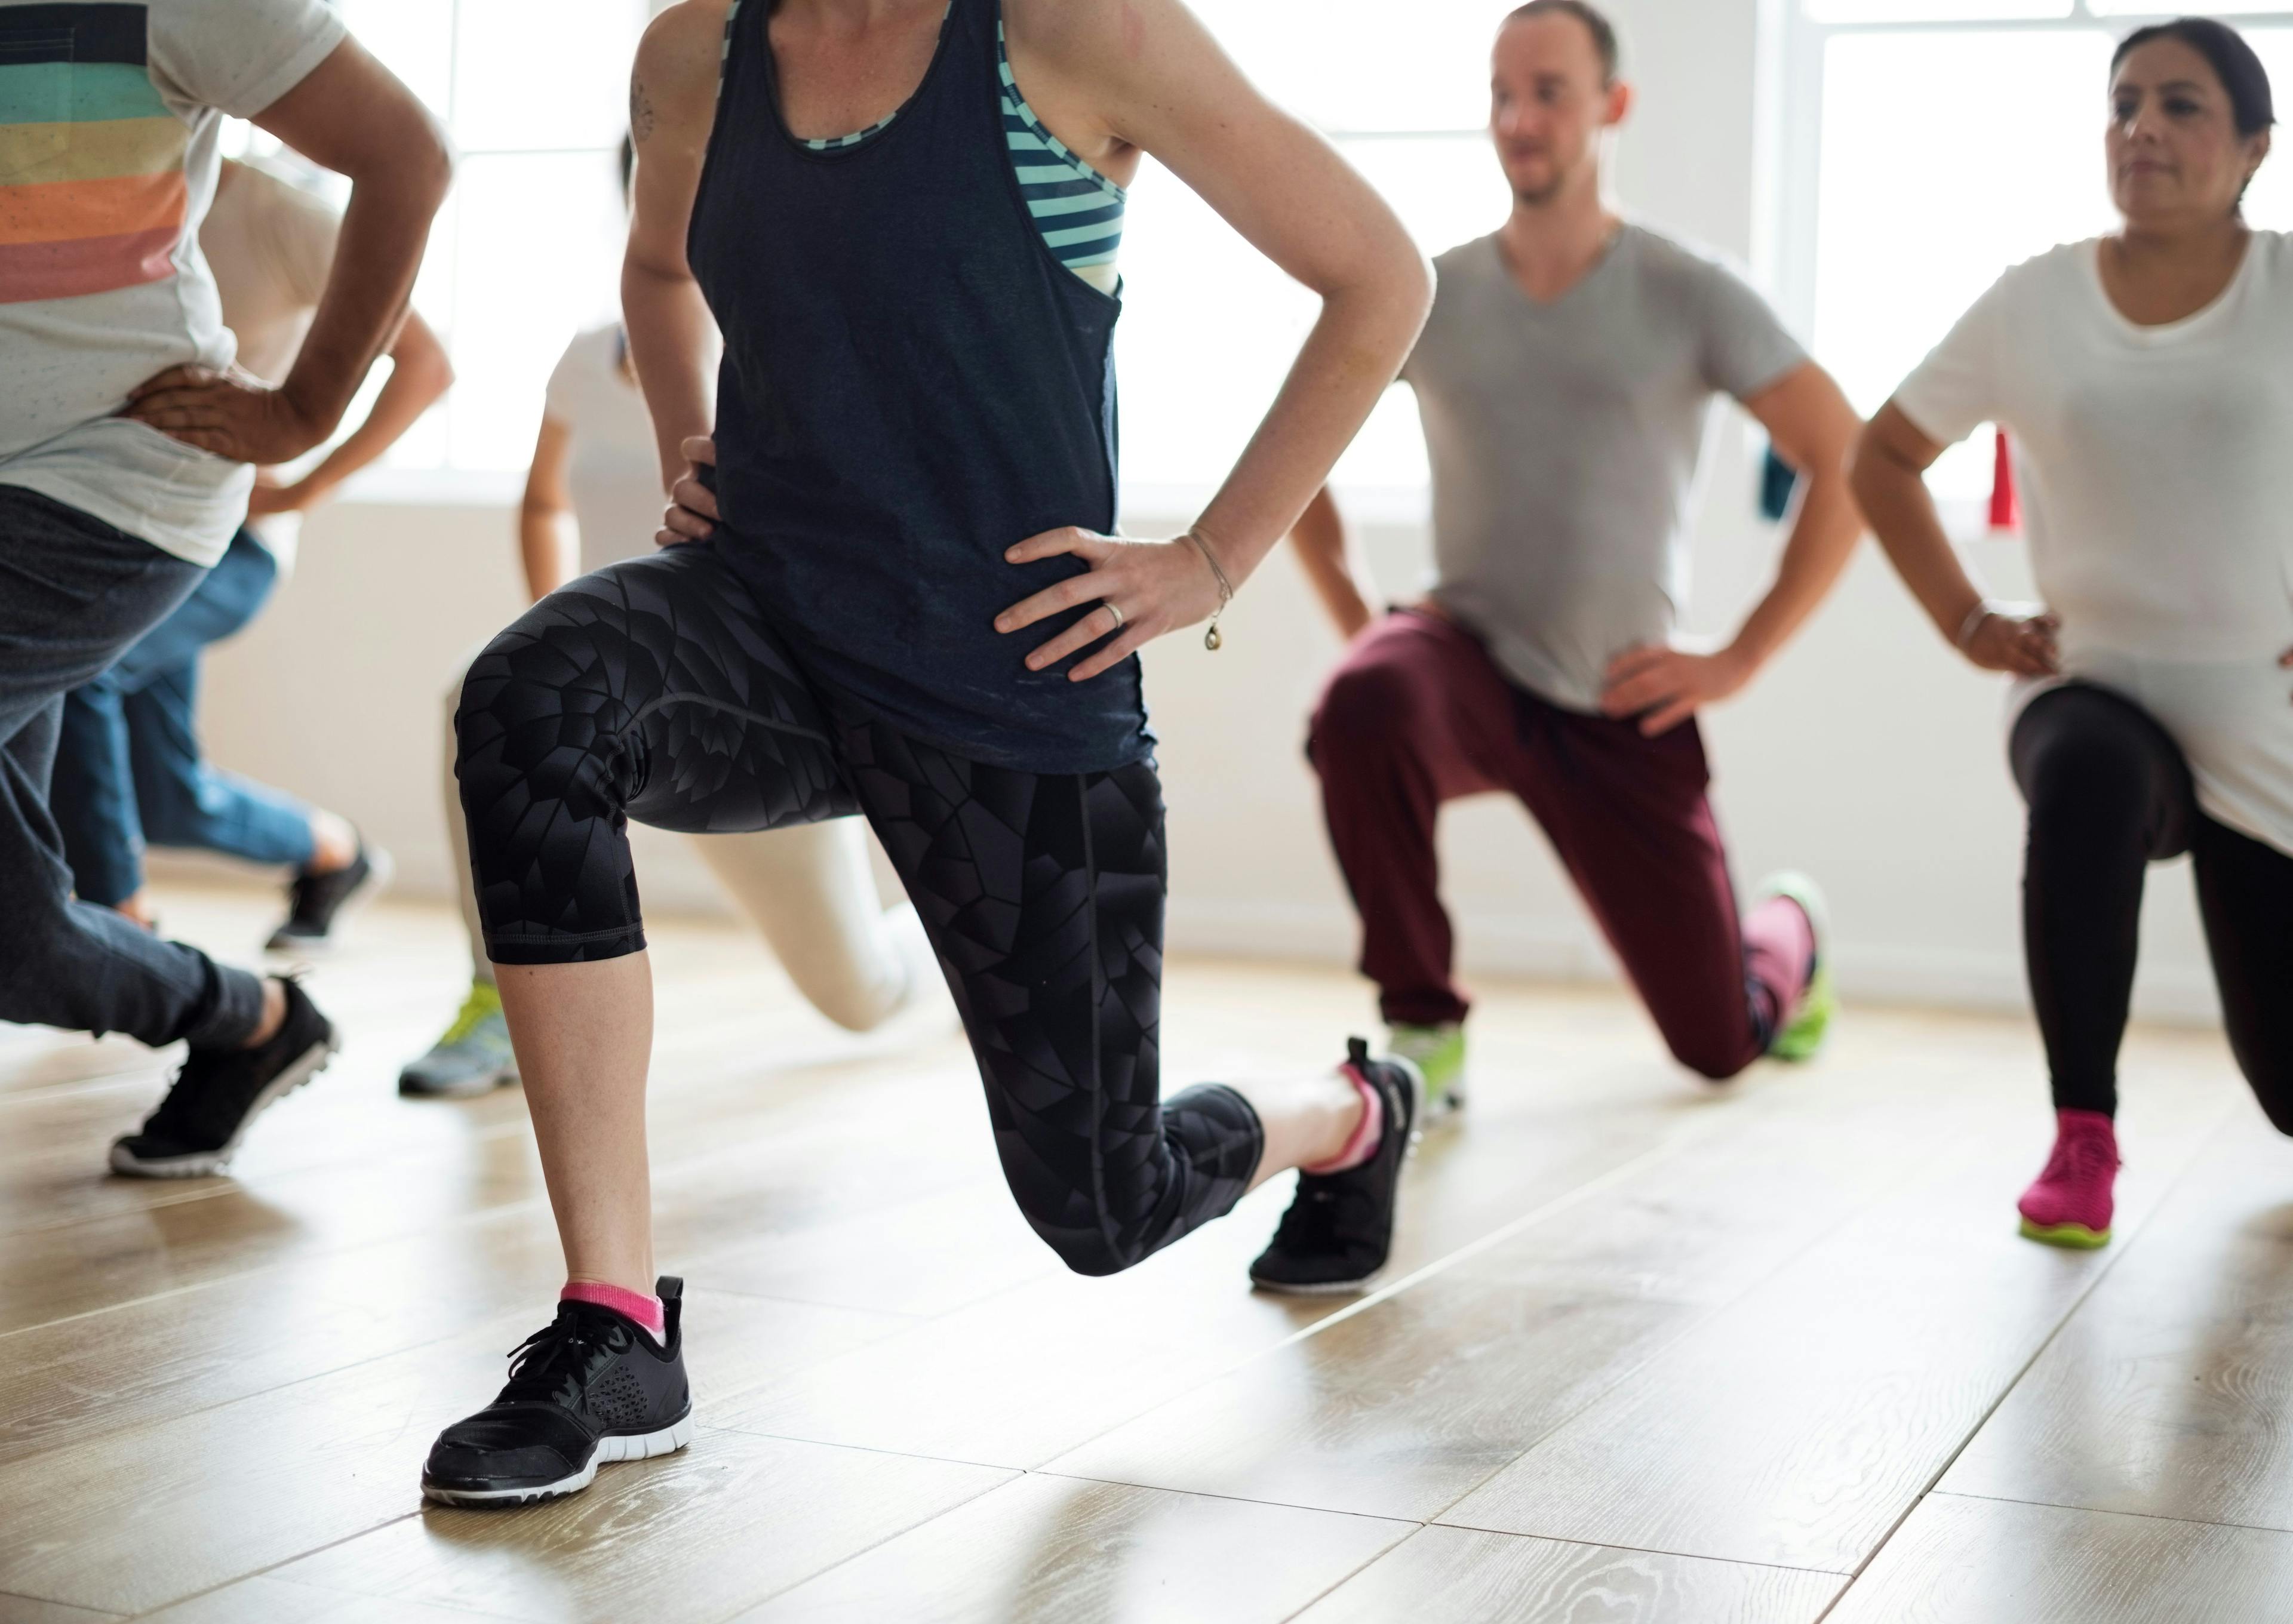 Diverse group of people exercising | Image Credit: Rawpixel.com - stock.adobe.com